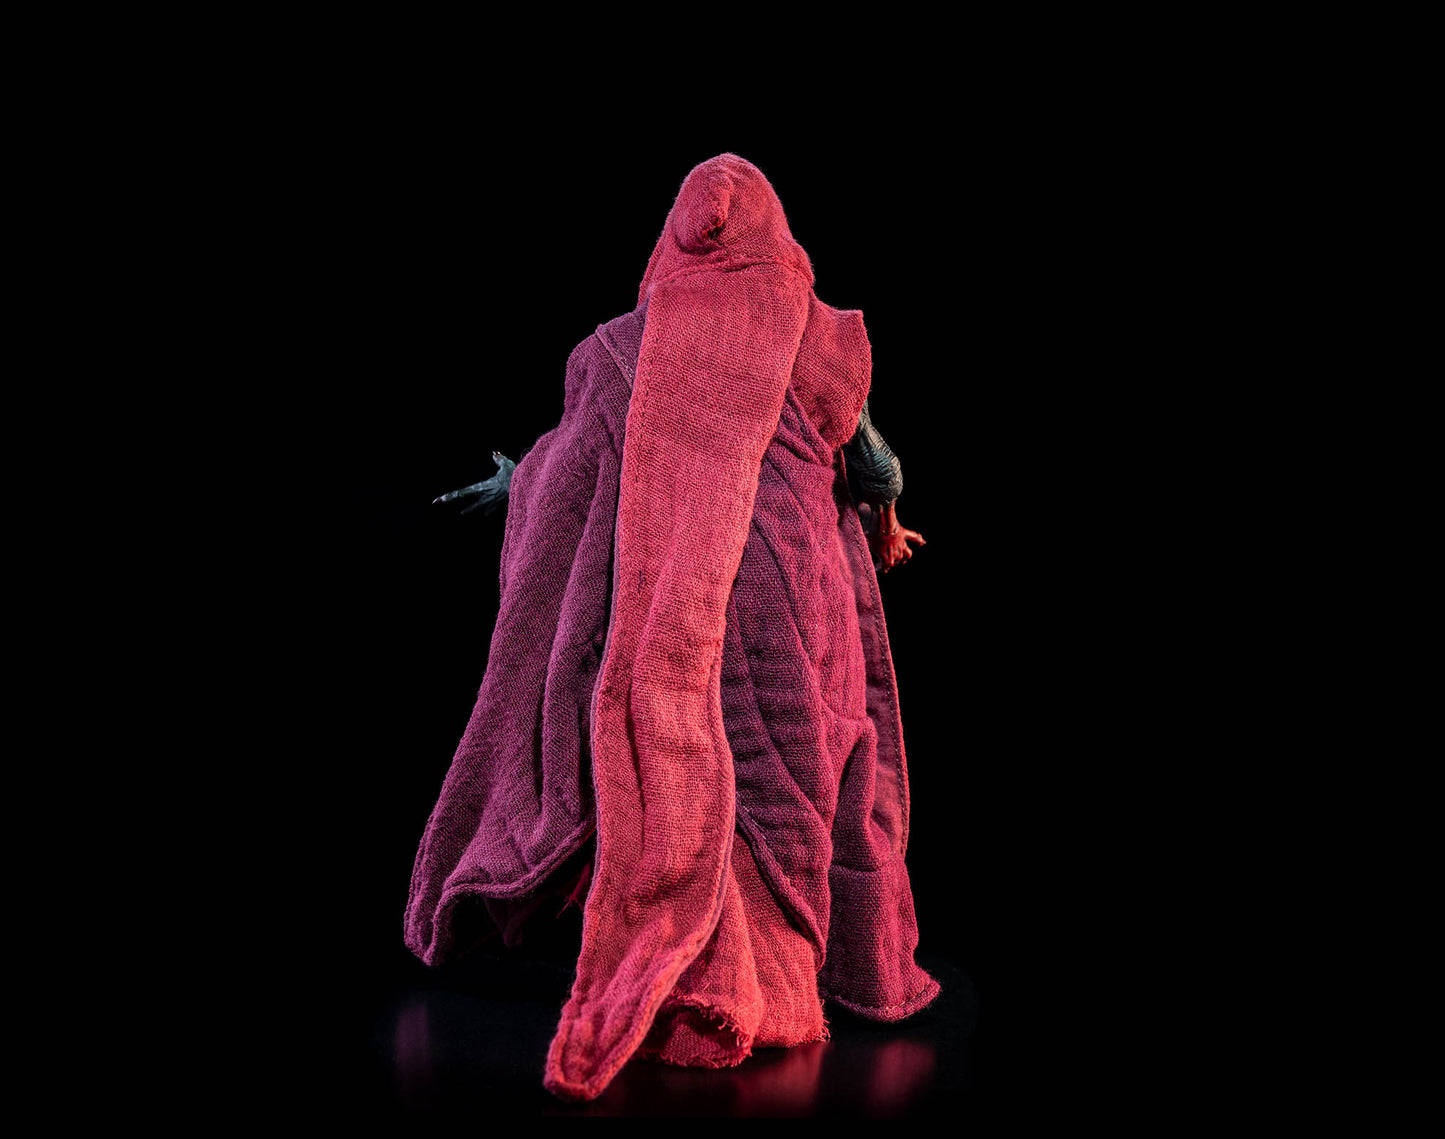 The Masque of the Red Death: Figura Obscura